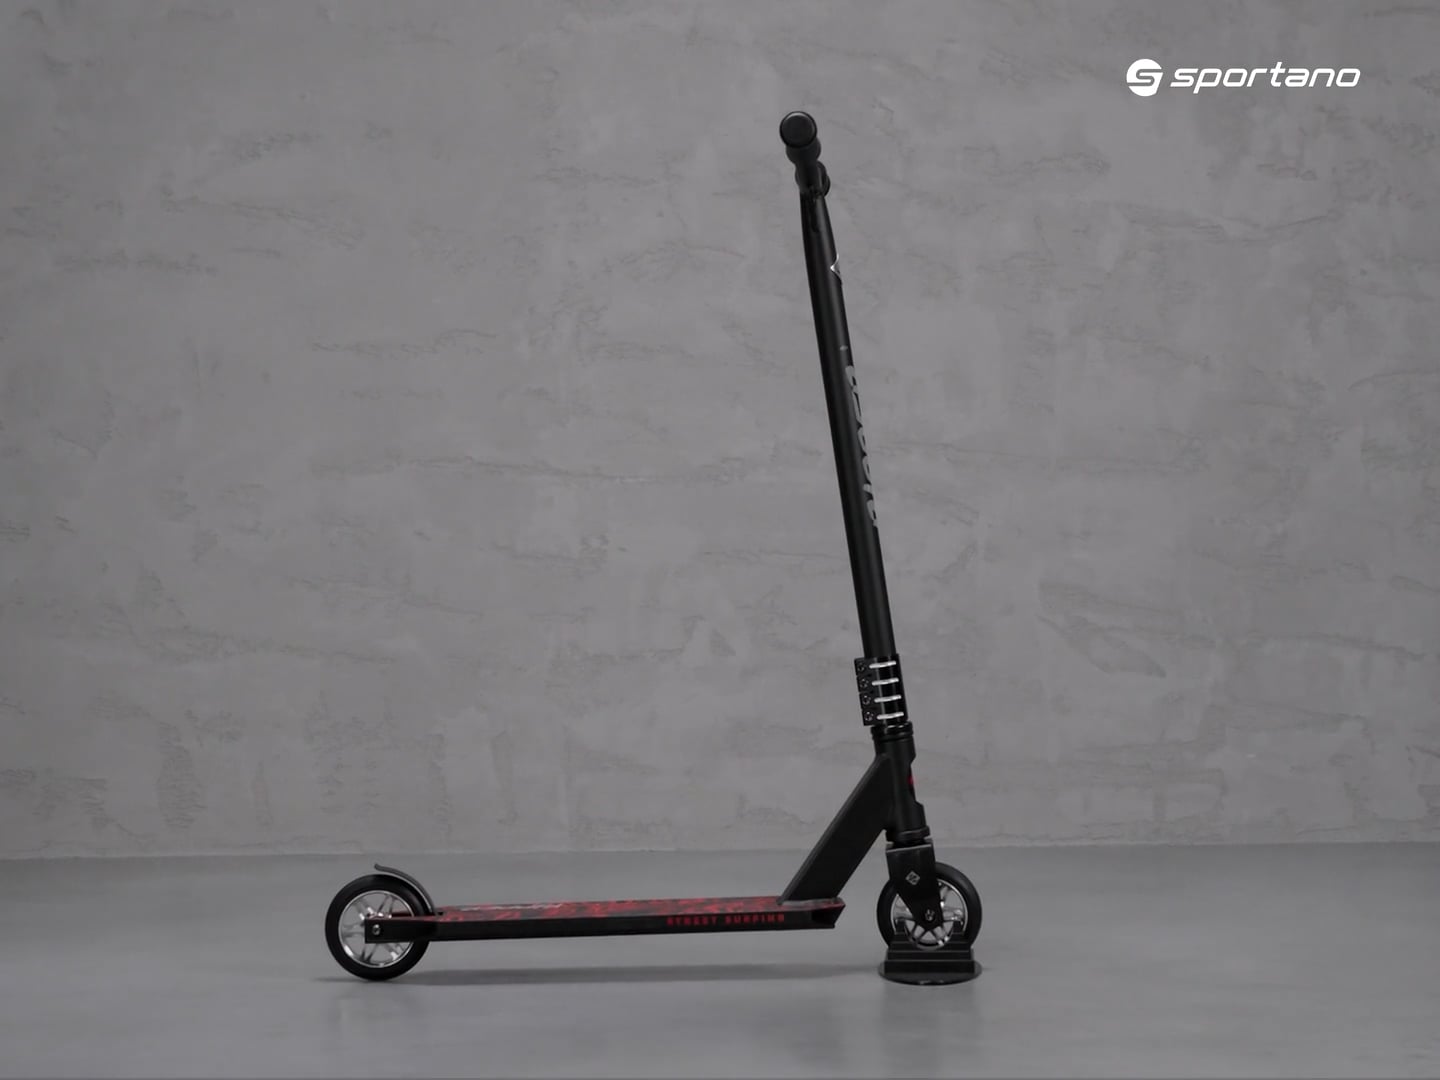 Street Surfing Stunt Scooter Ripper freestyle scooter black and red